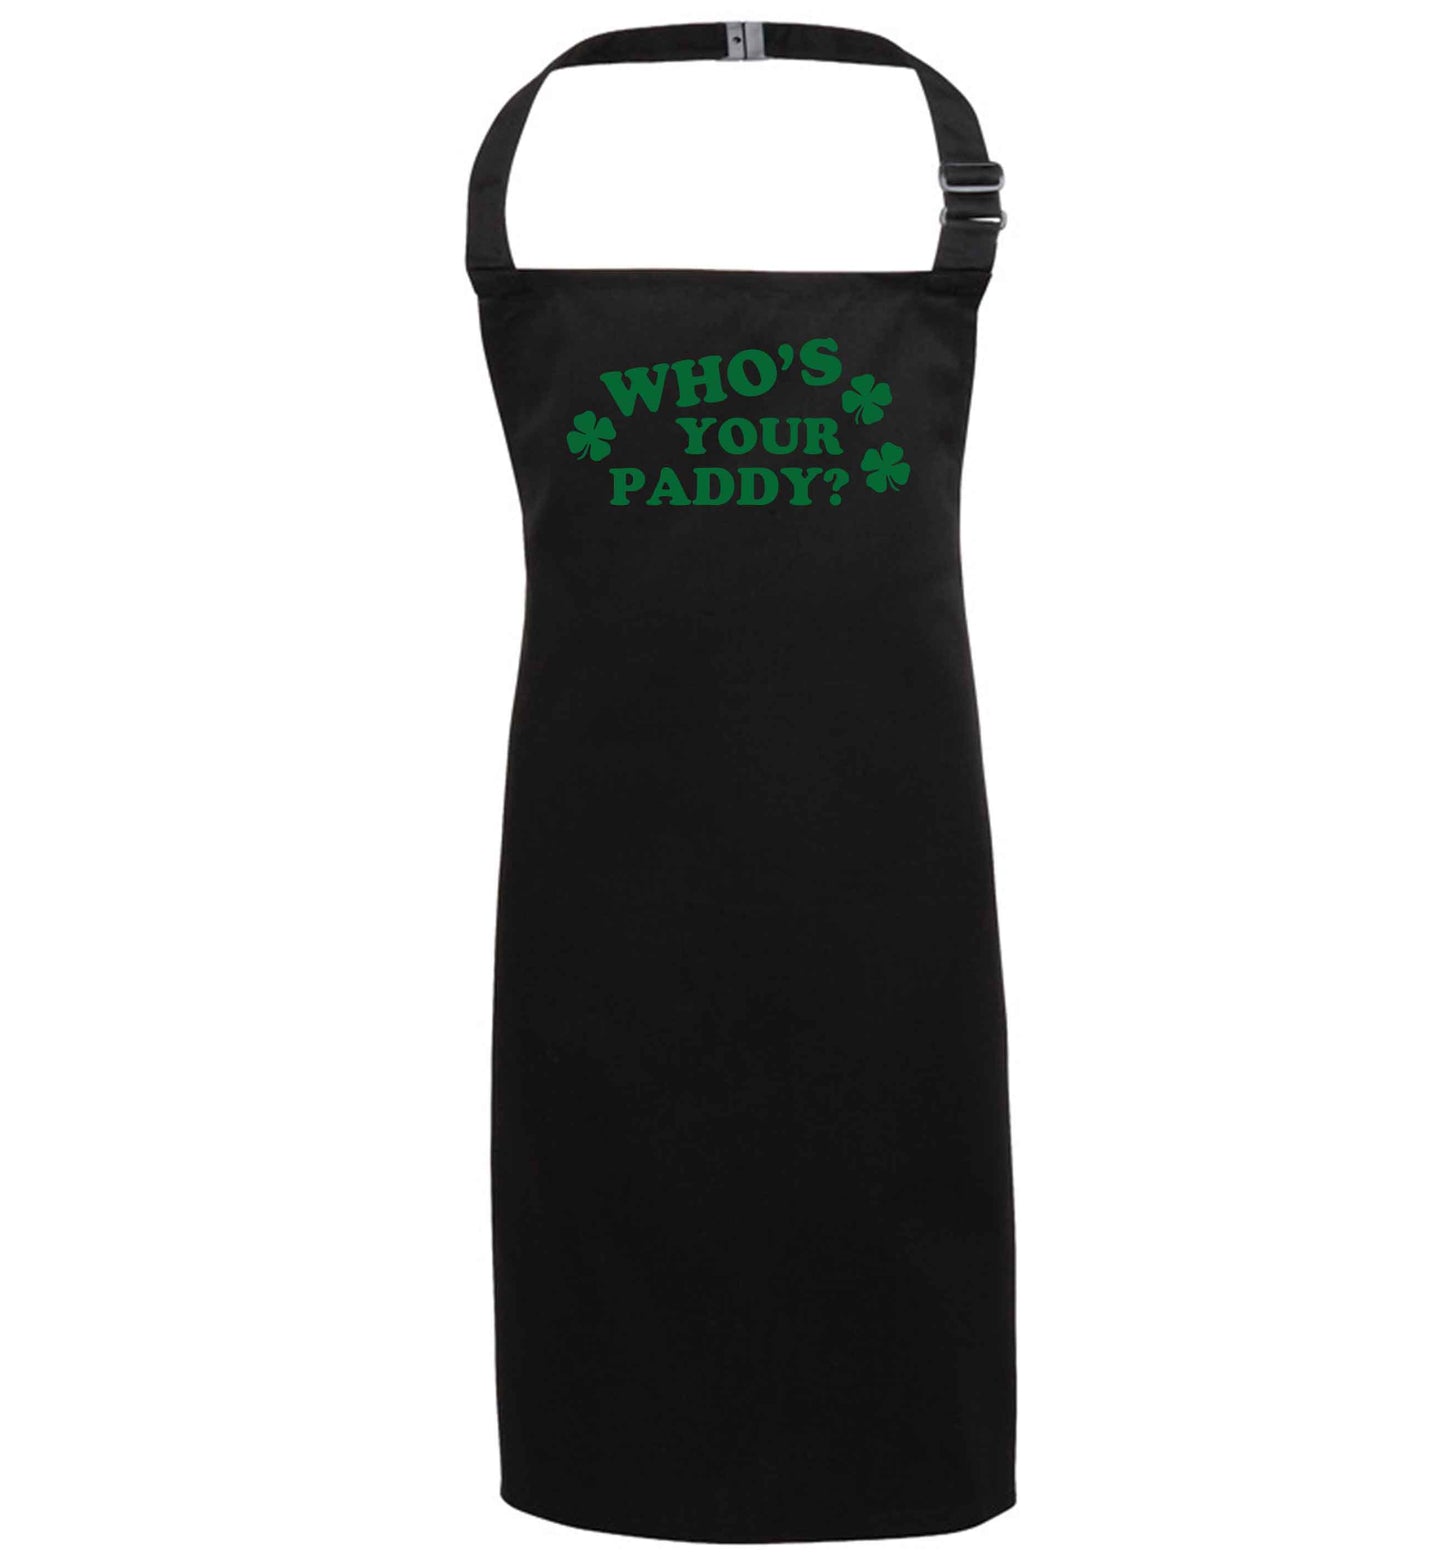 Who's your paddy? black apron 7-10 years